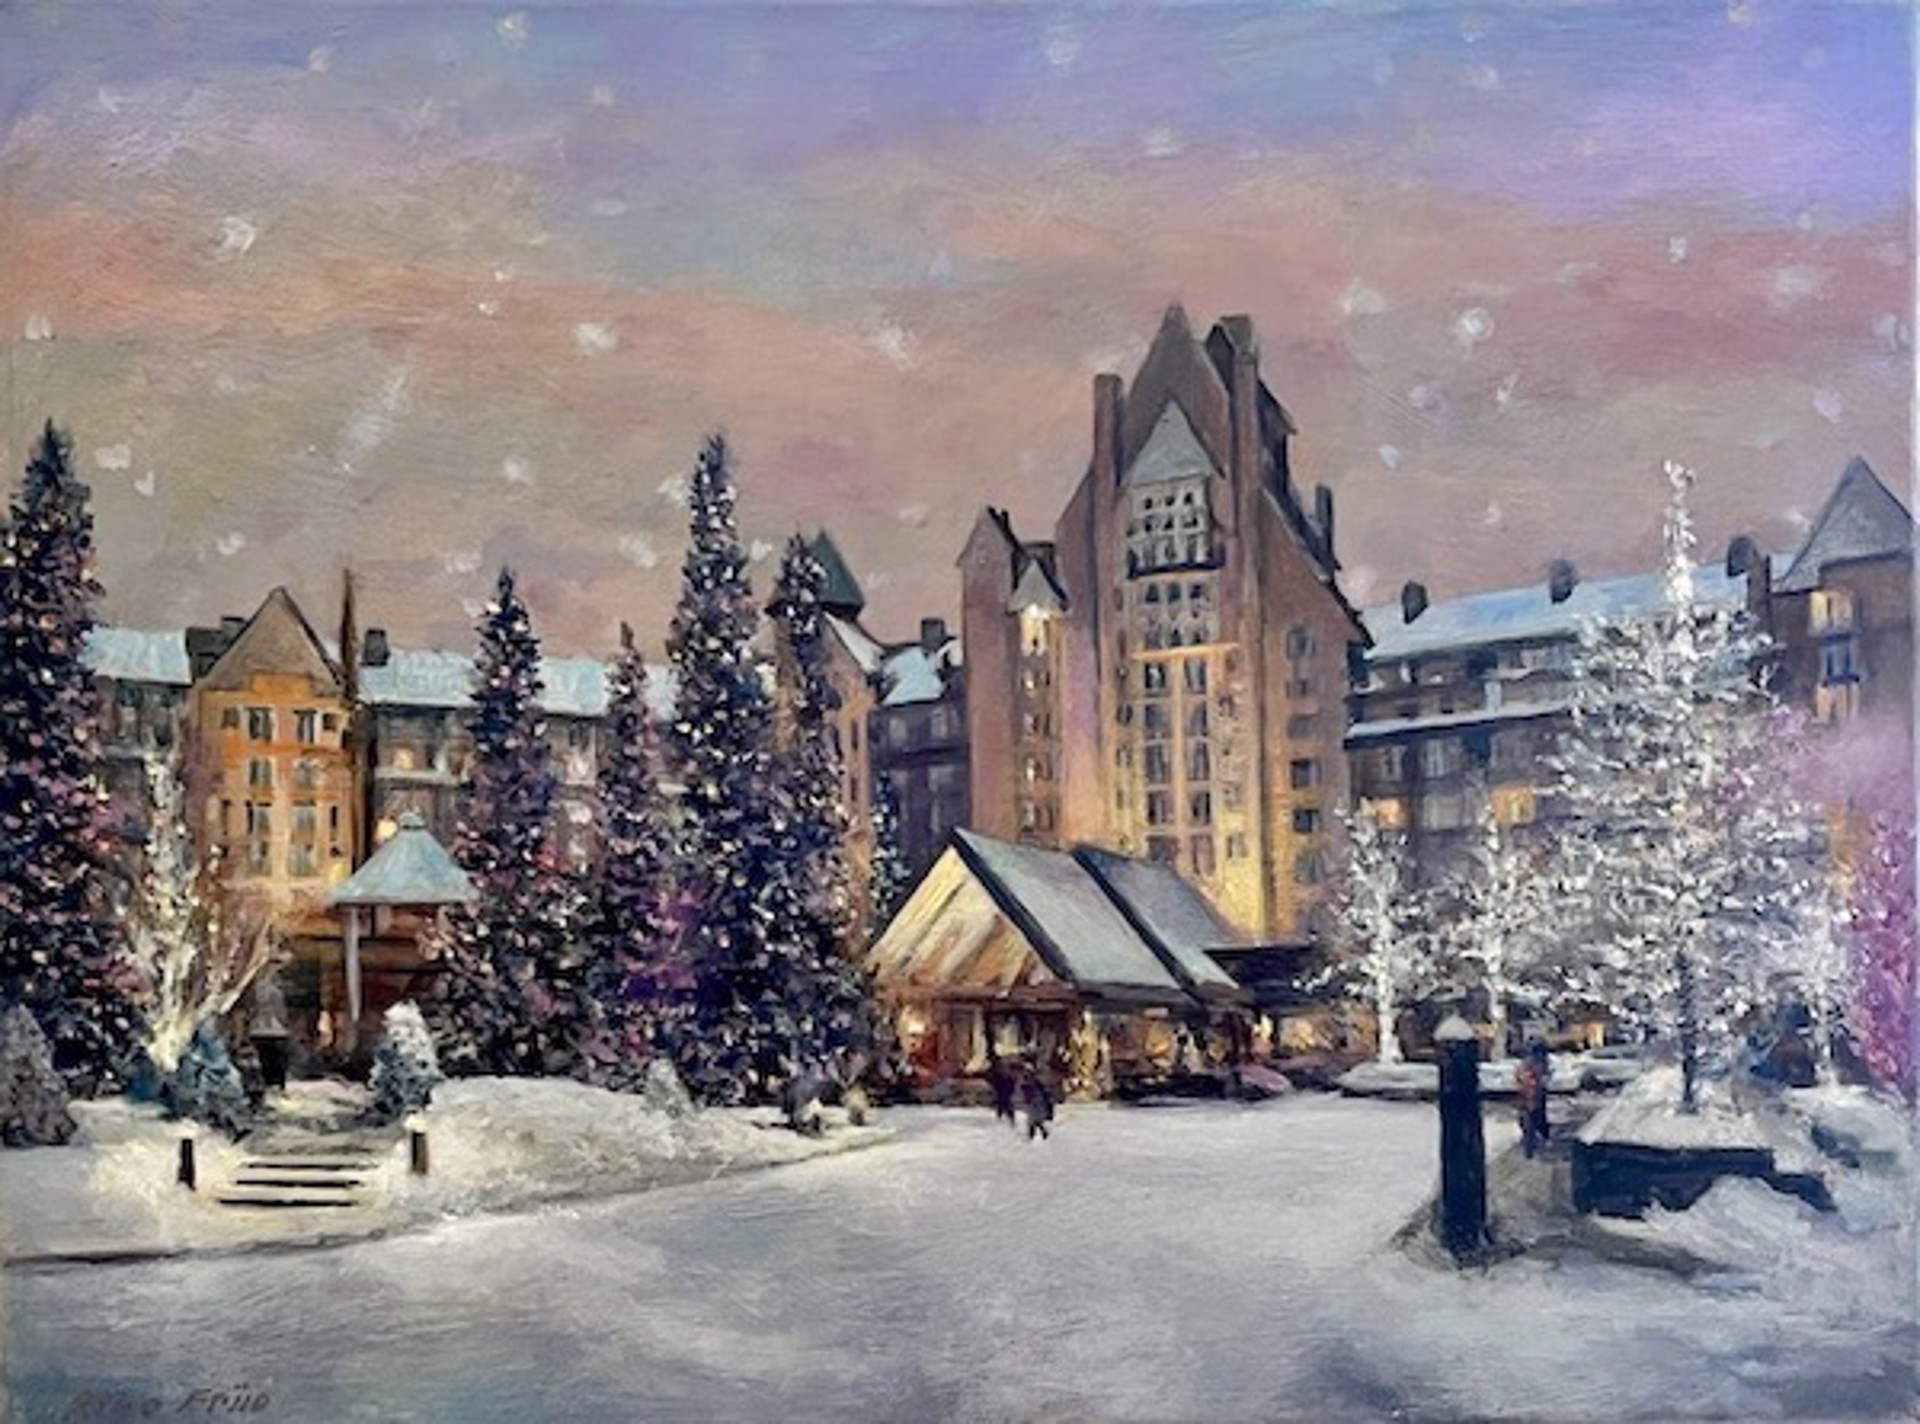 Dusk Chateau Whistler by Rino Friio